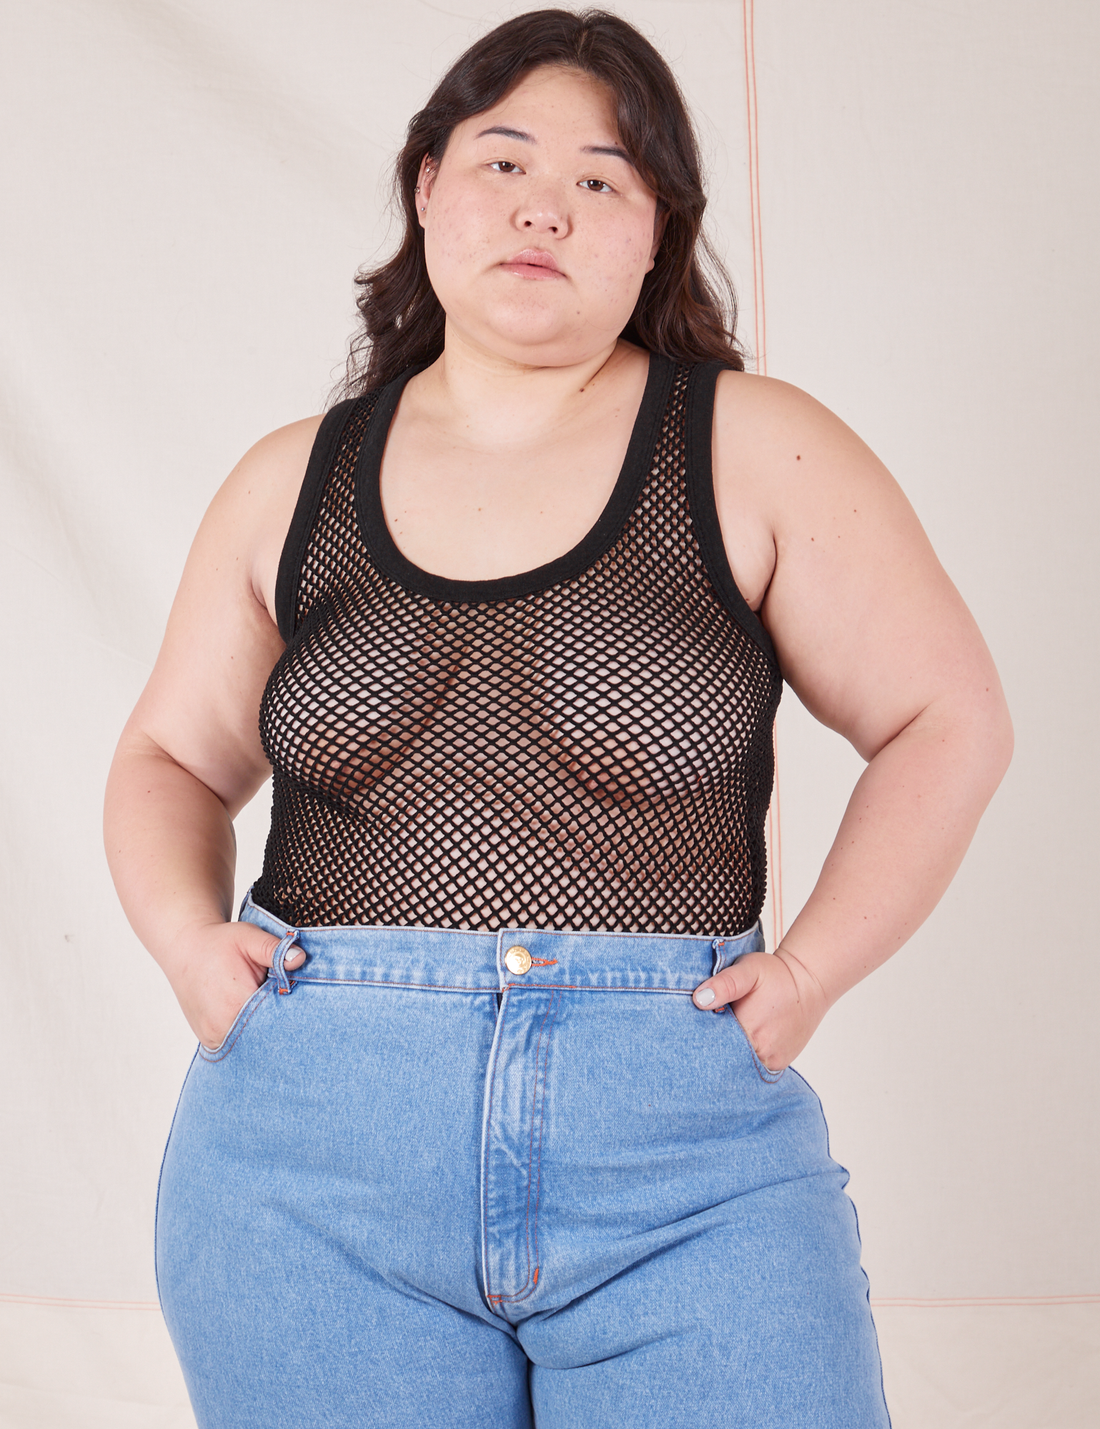 Ashley is 5'7" and wearing L Mesh Tank Top in Basic Black